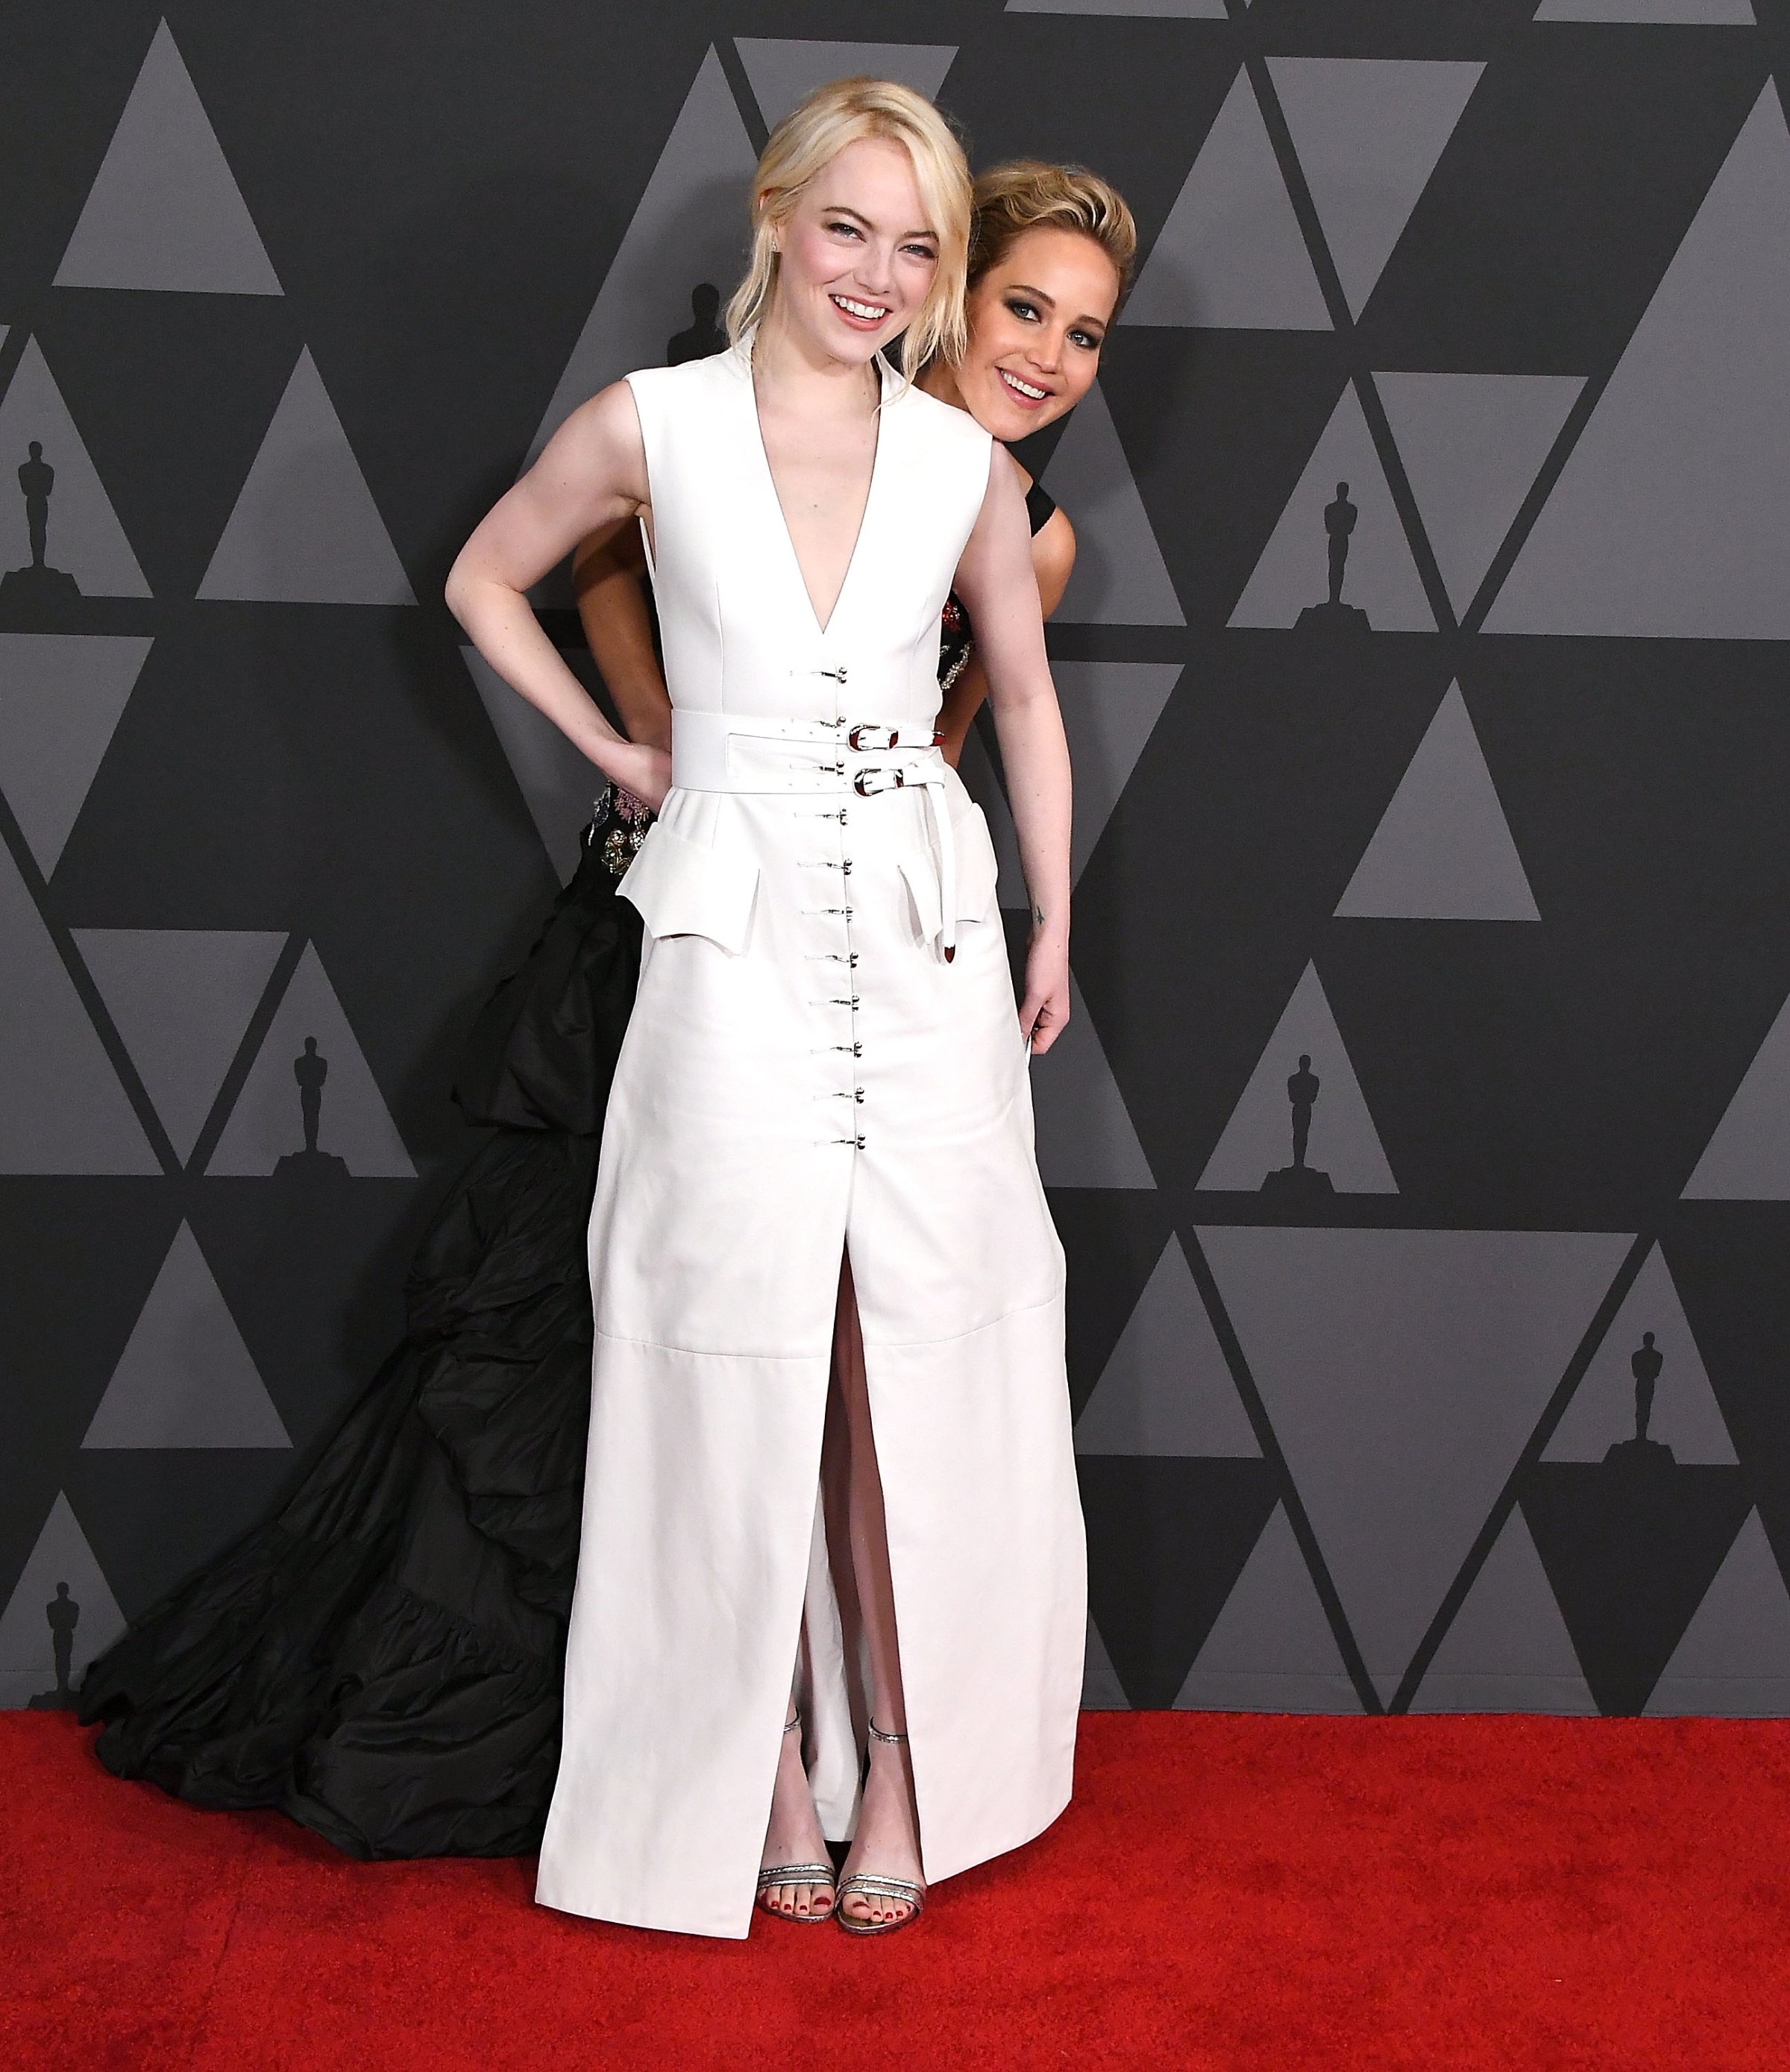 Academy Of Motion Picture Arts And Sciences' 9th Annual Governors Awards - Arrivals